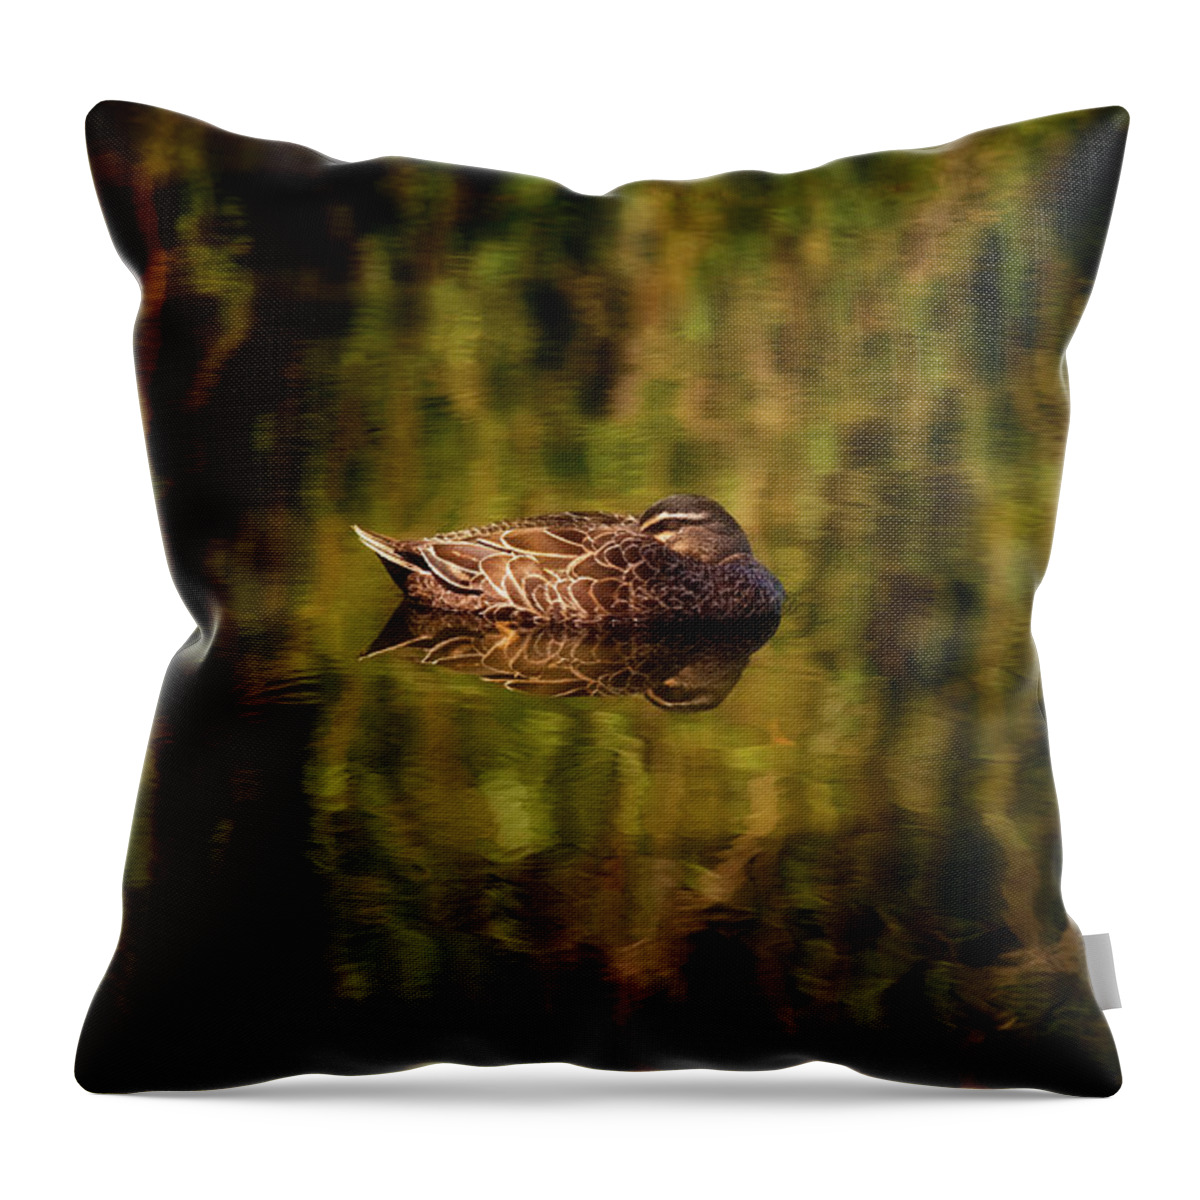 Mad About Wa Throw Pillow featuring the photograph Sleepy Duck, Yanchep National Park by Dave Catley